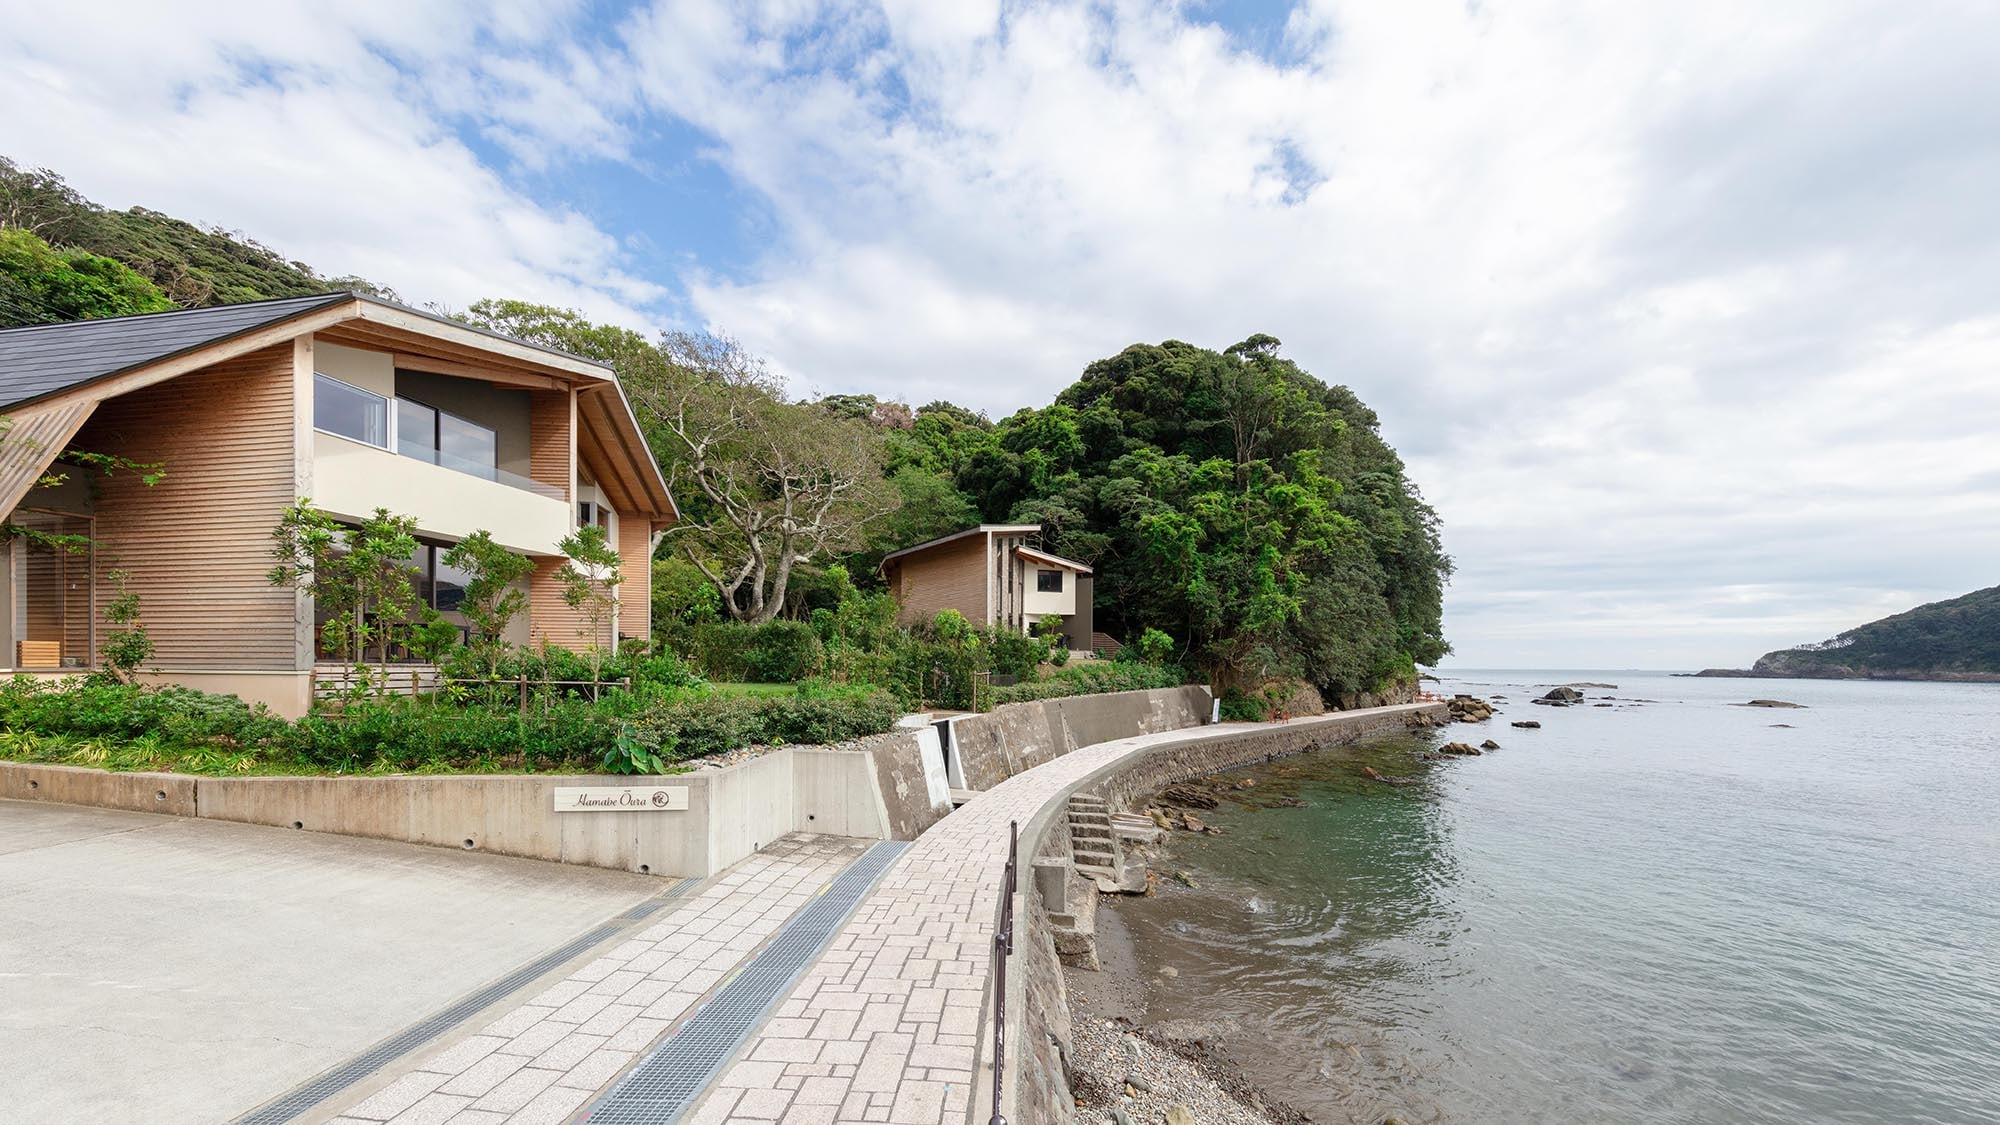 ・[Appearance] It is a rental villa where you can refresh yourself surrounded by nature.